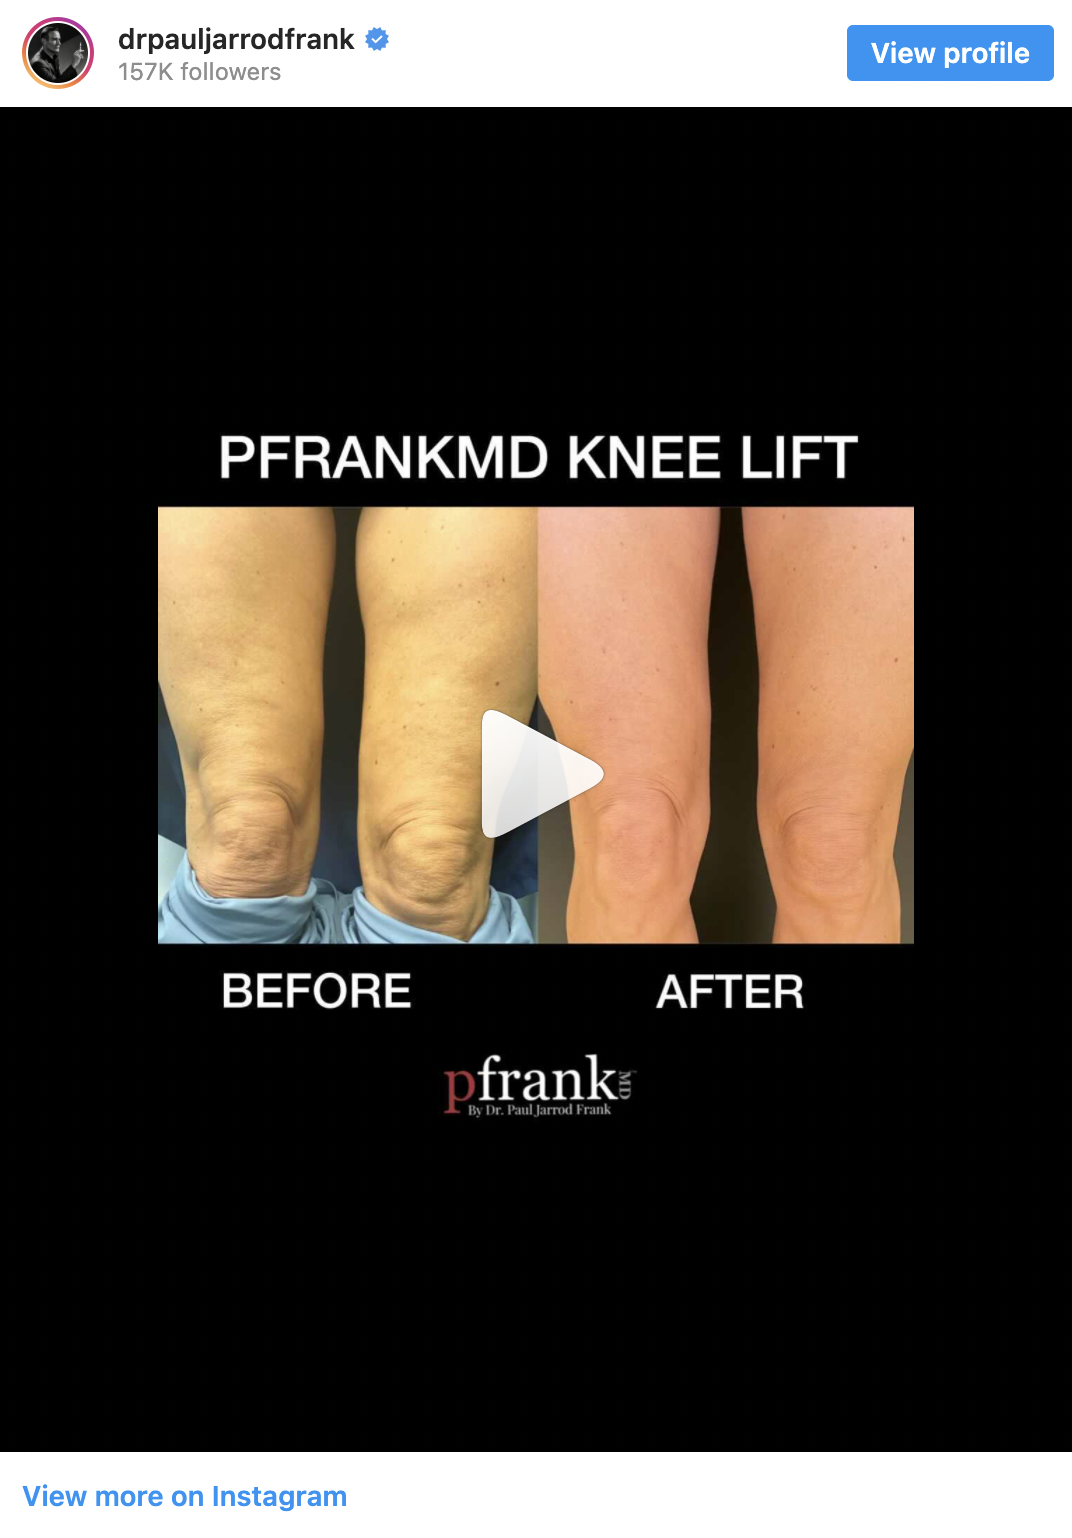 Knee Lift Before and After video by Dr. Paul Jarrod Frank of PFRANKMD in New York City, NY